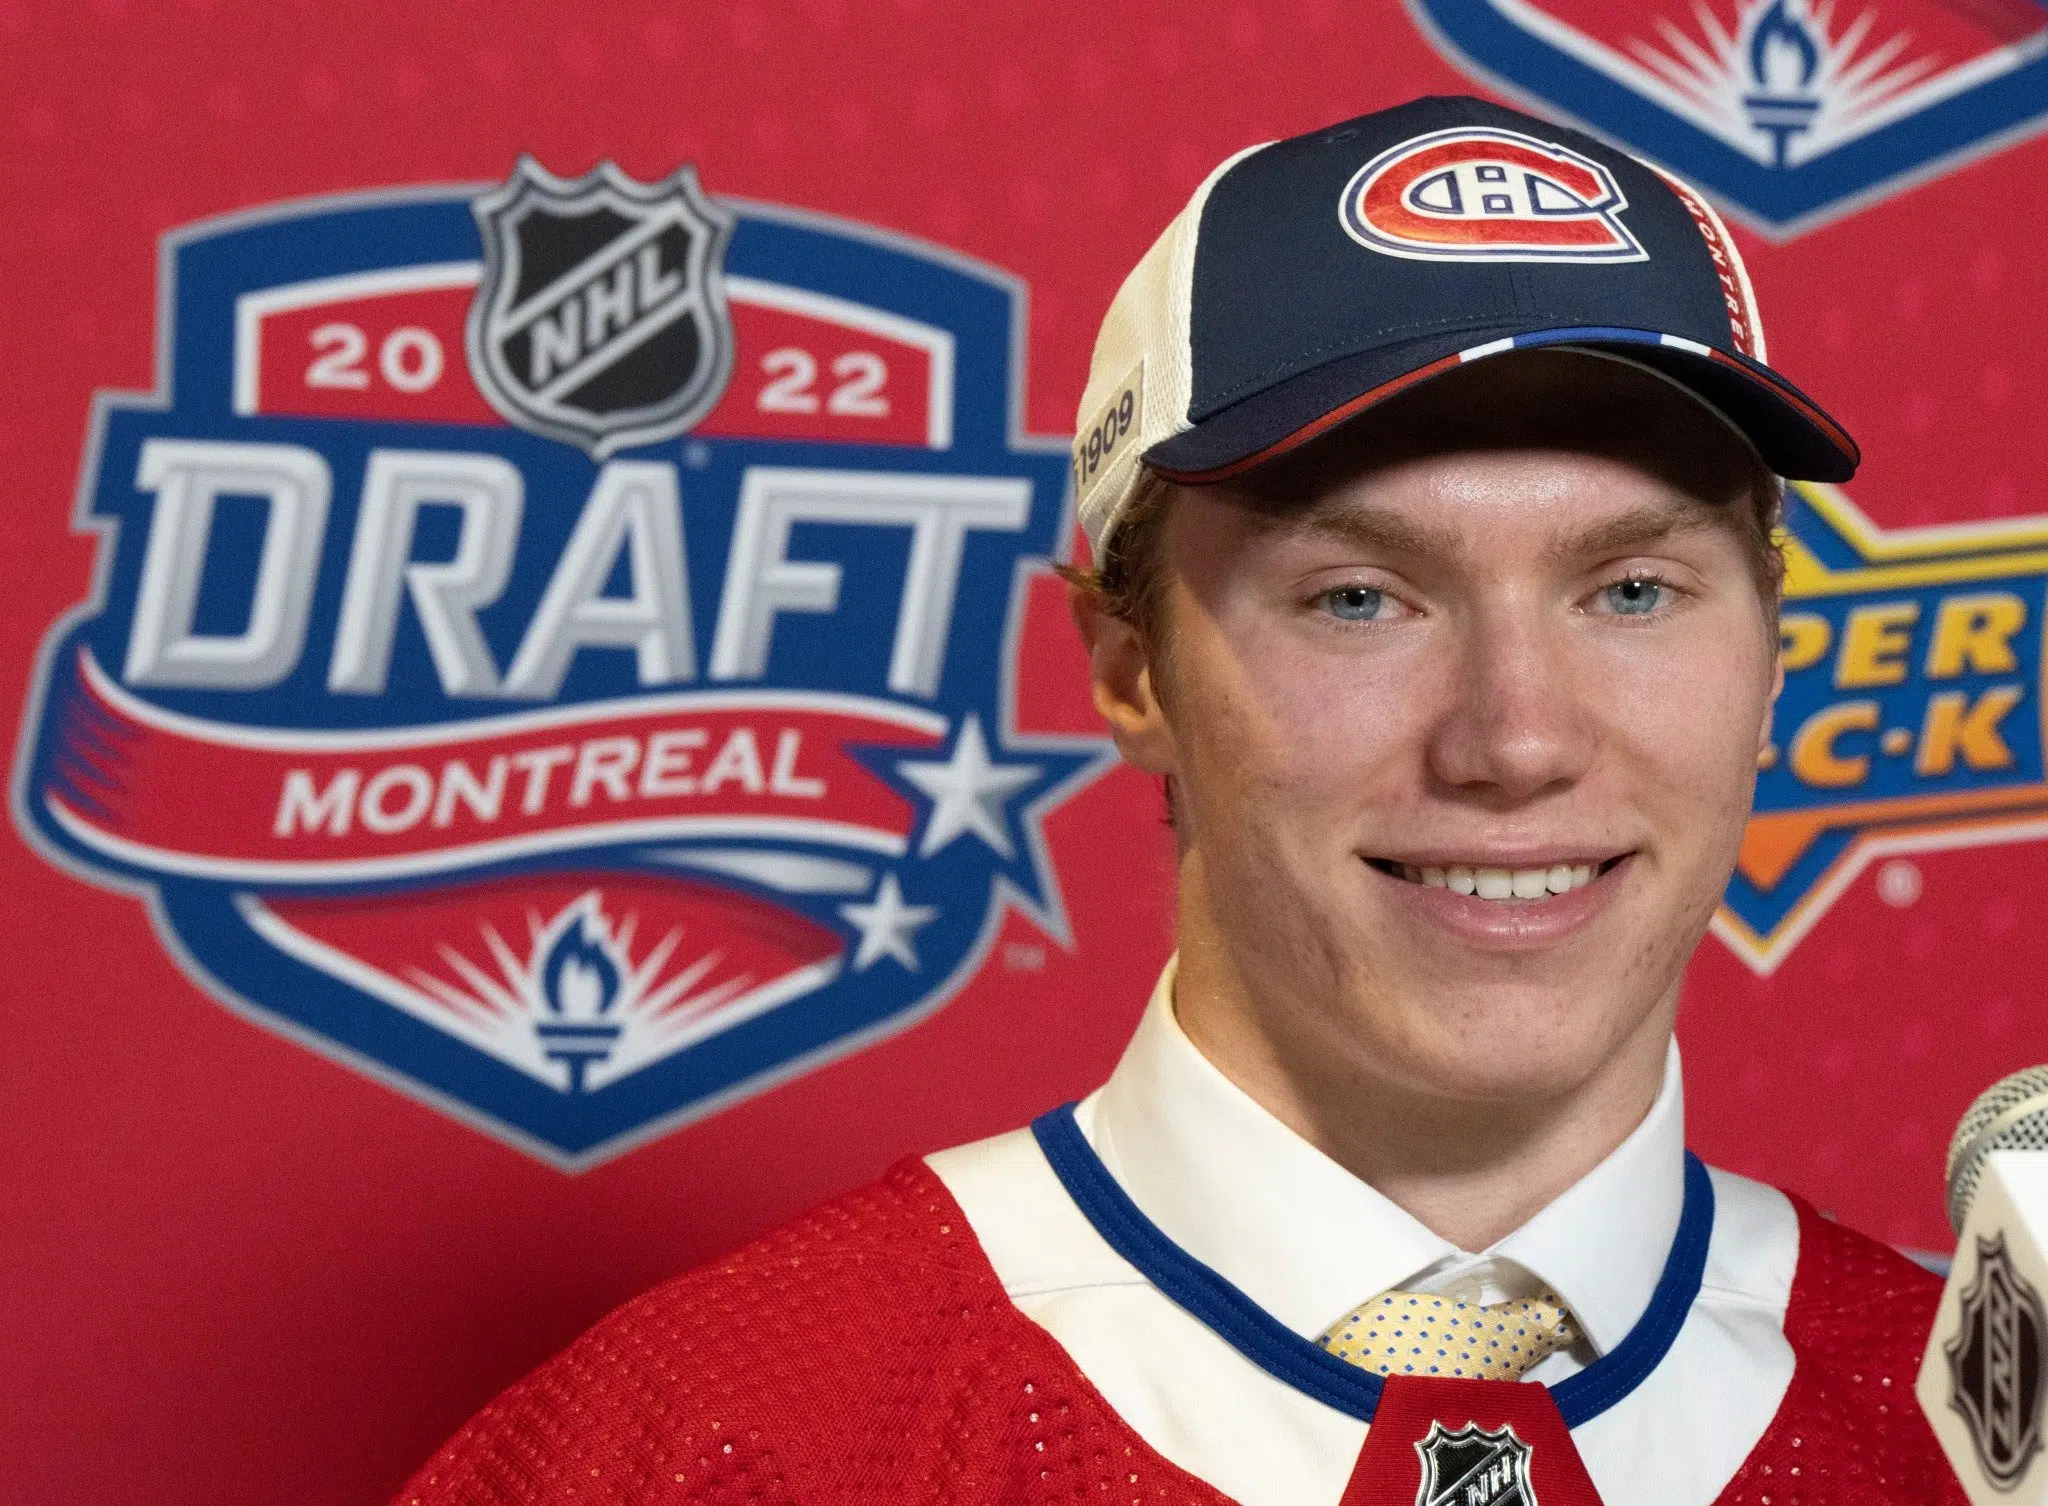 Former Quinte Red Devil drafted